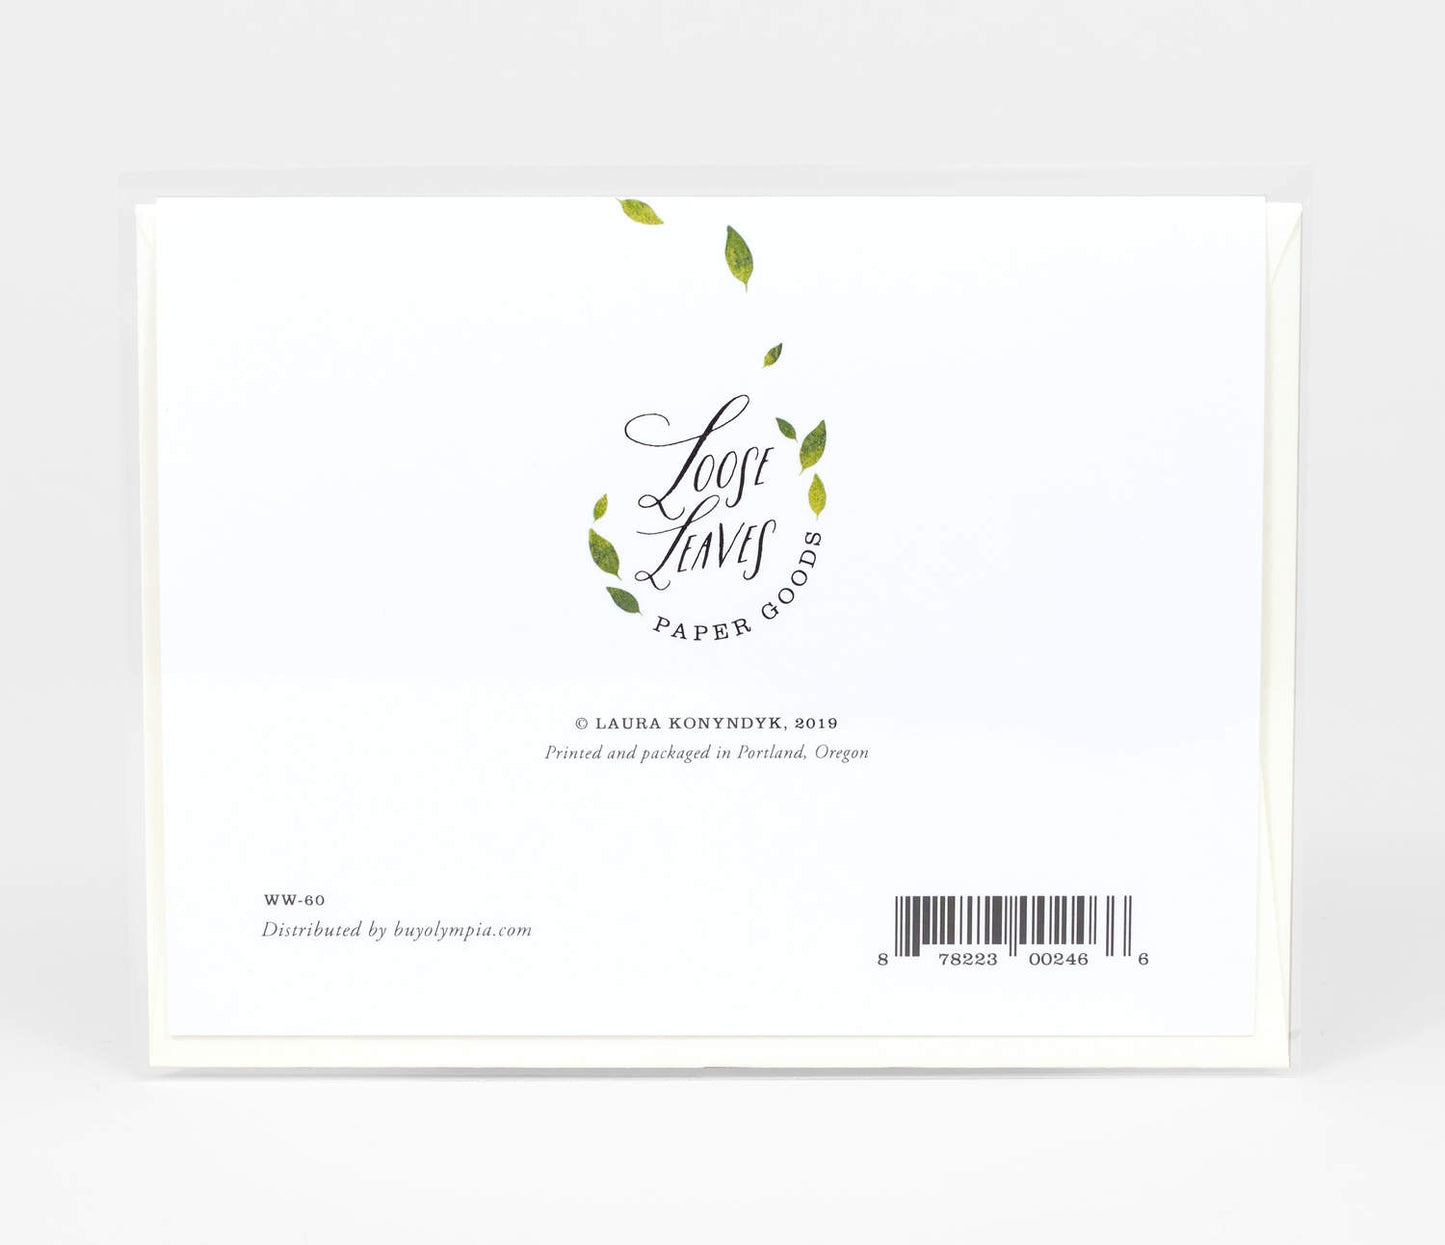 Peace + Love on Your Wedding Day Card